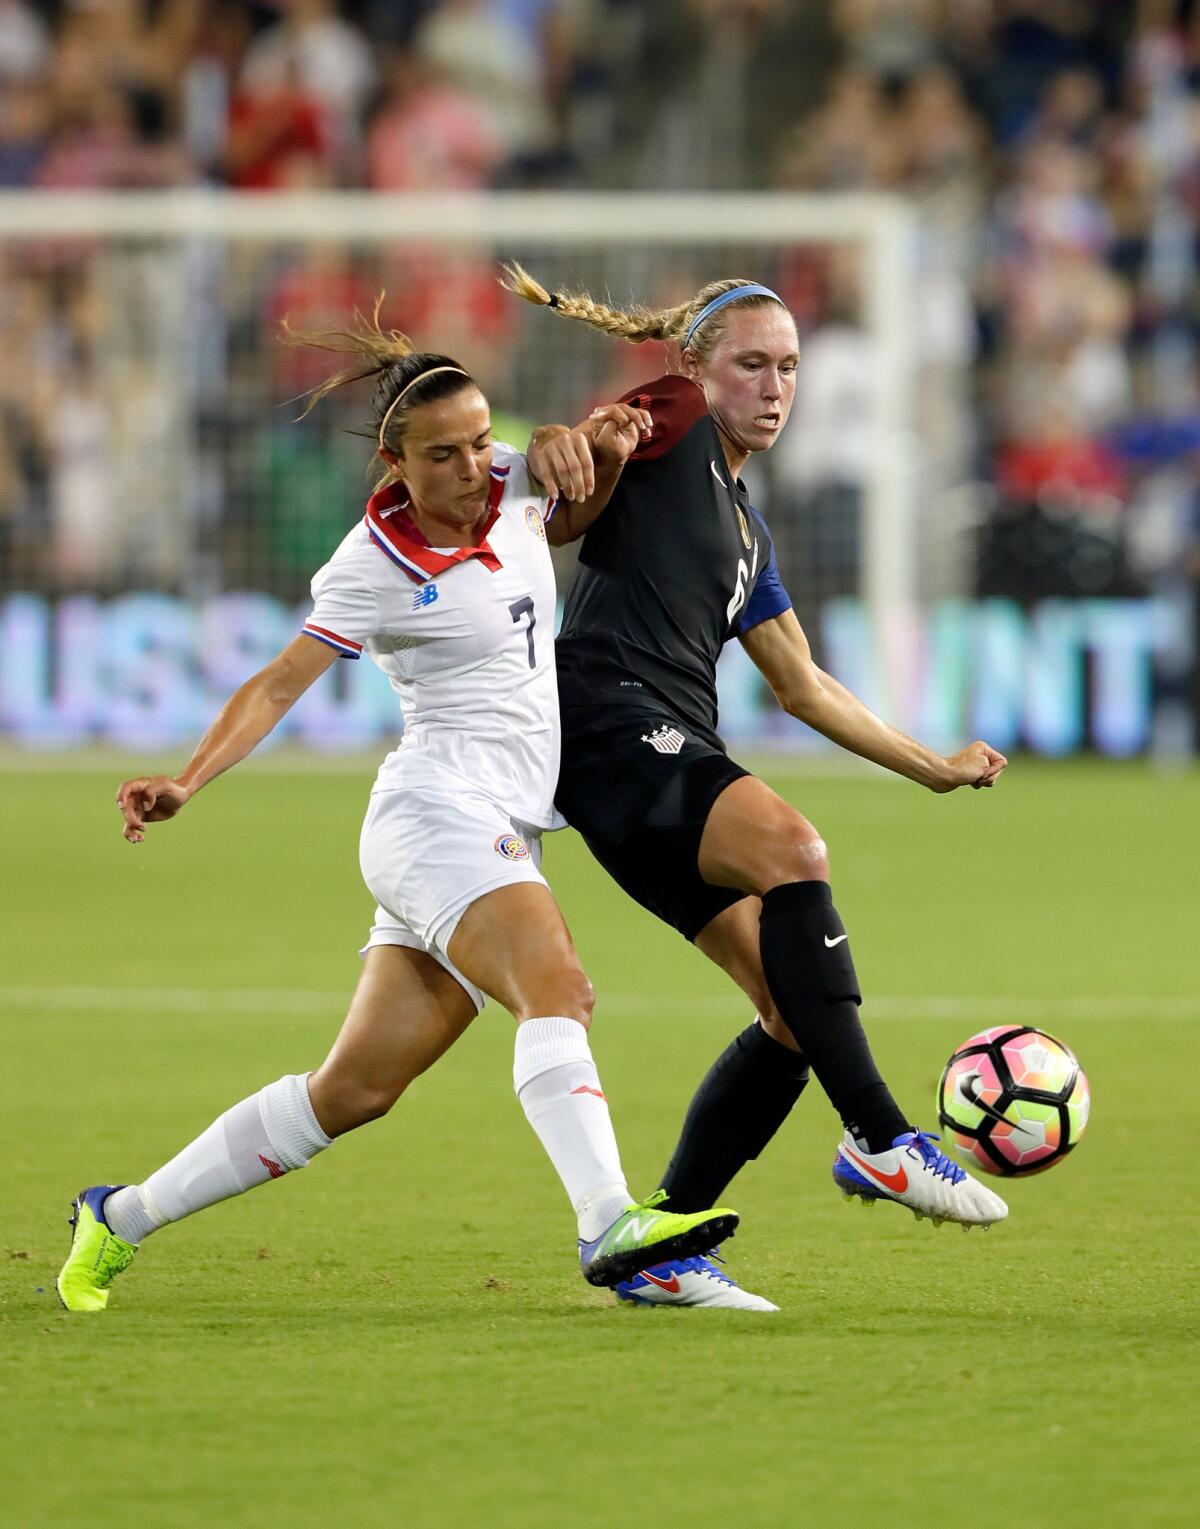 American Whitney Engen (6) vies for the ball against Costa Rica's Melissa Herrera during a game on July 22.